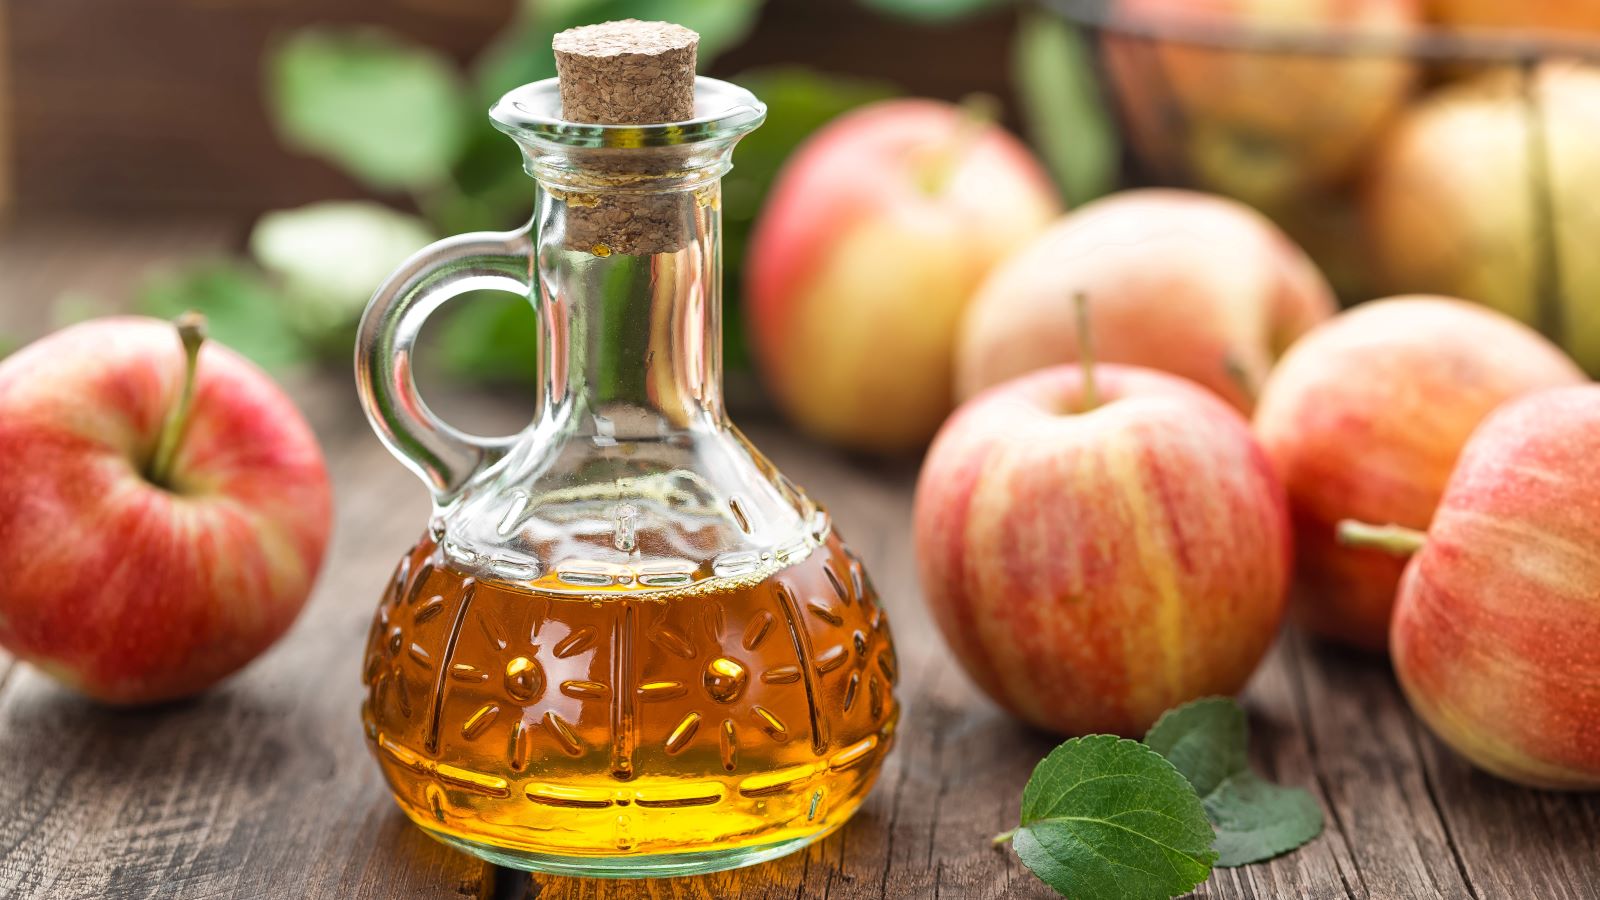 Many people believe apple cider vinegar helps with weight loss and more, despite little scientific evidence. Here’s what to know.